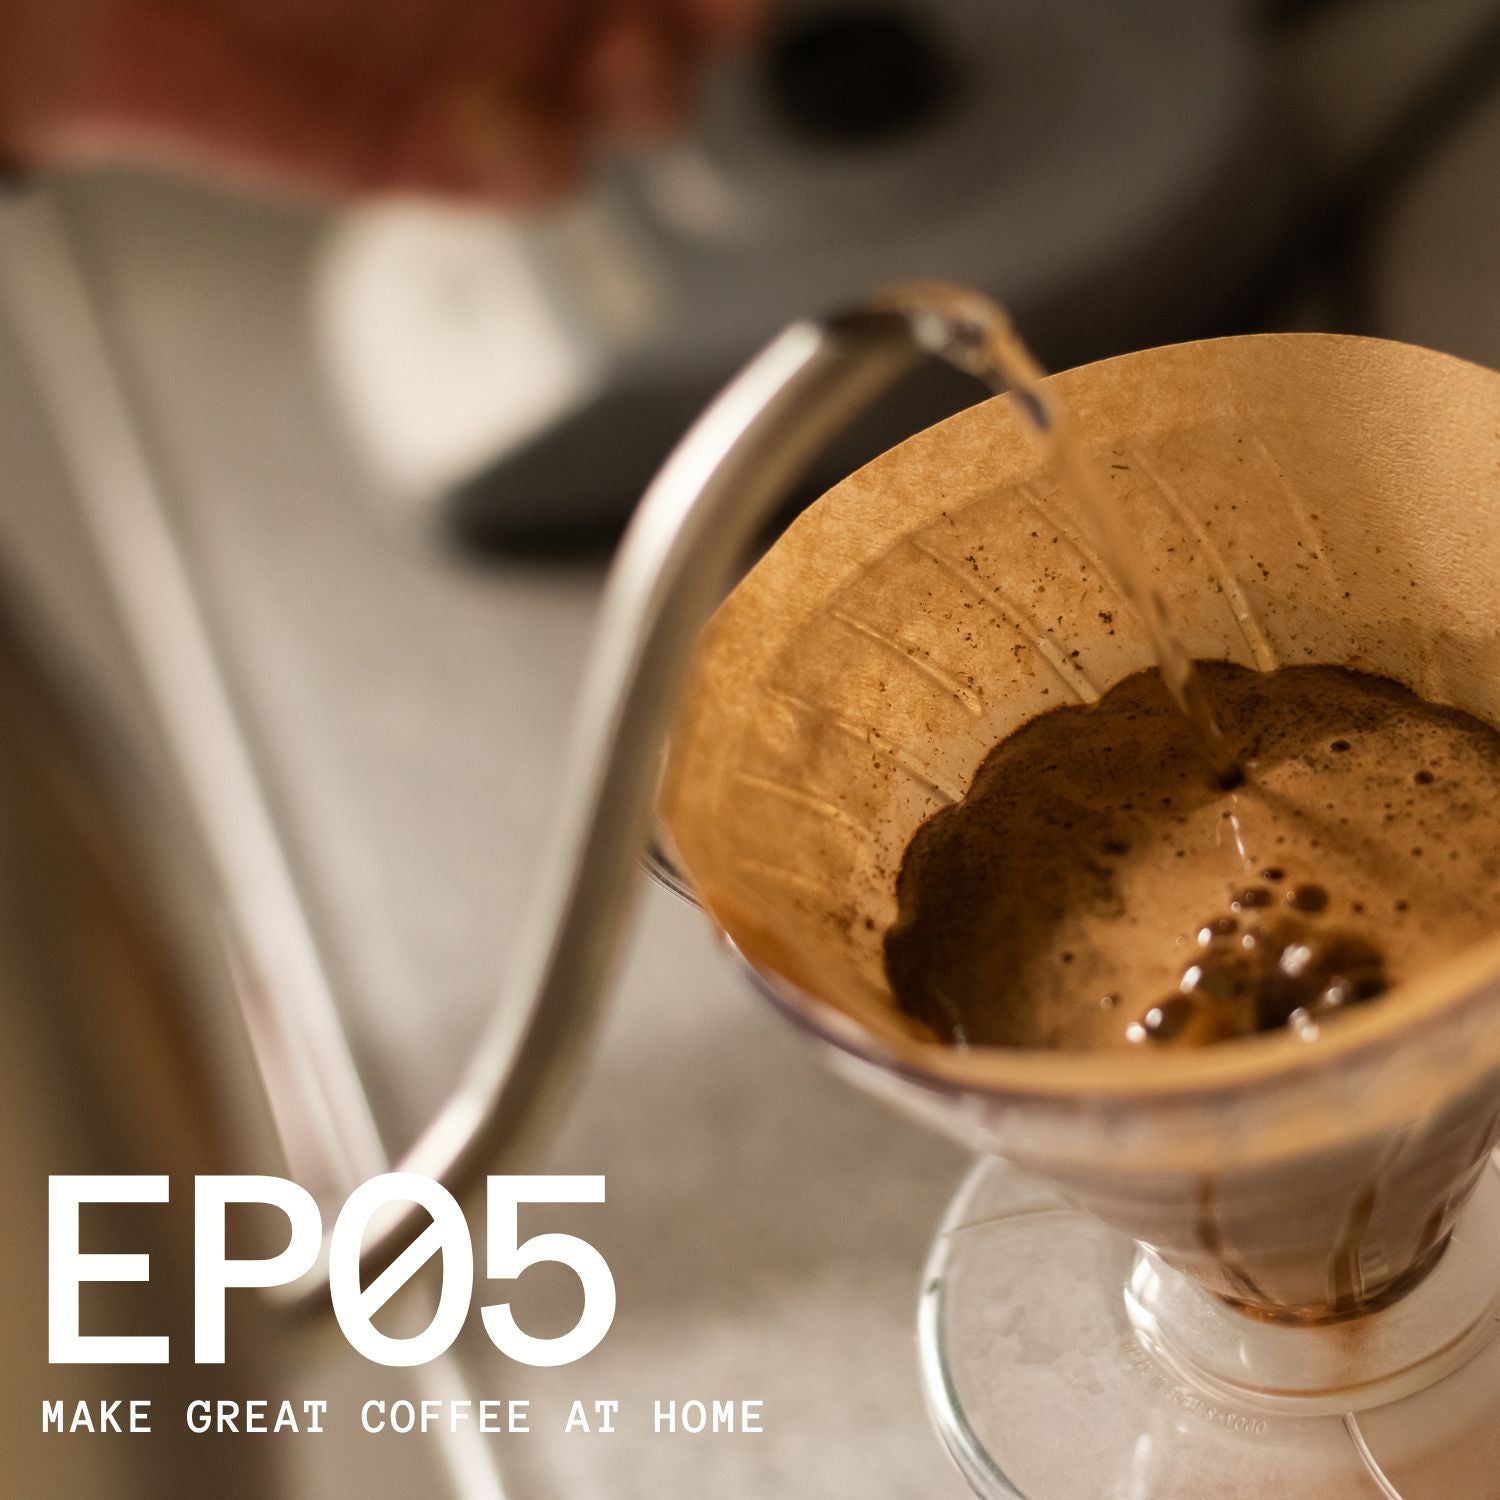 Episode 5 - Make Great Coffee at Home